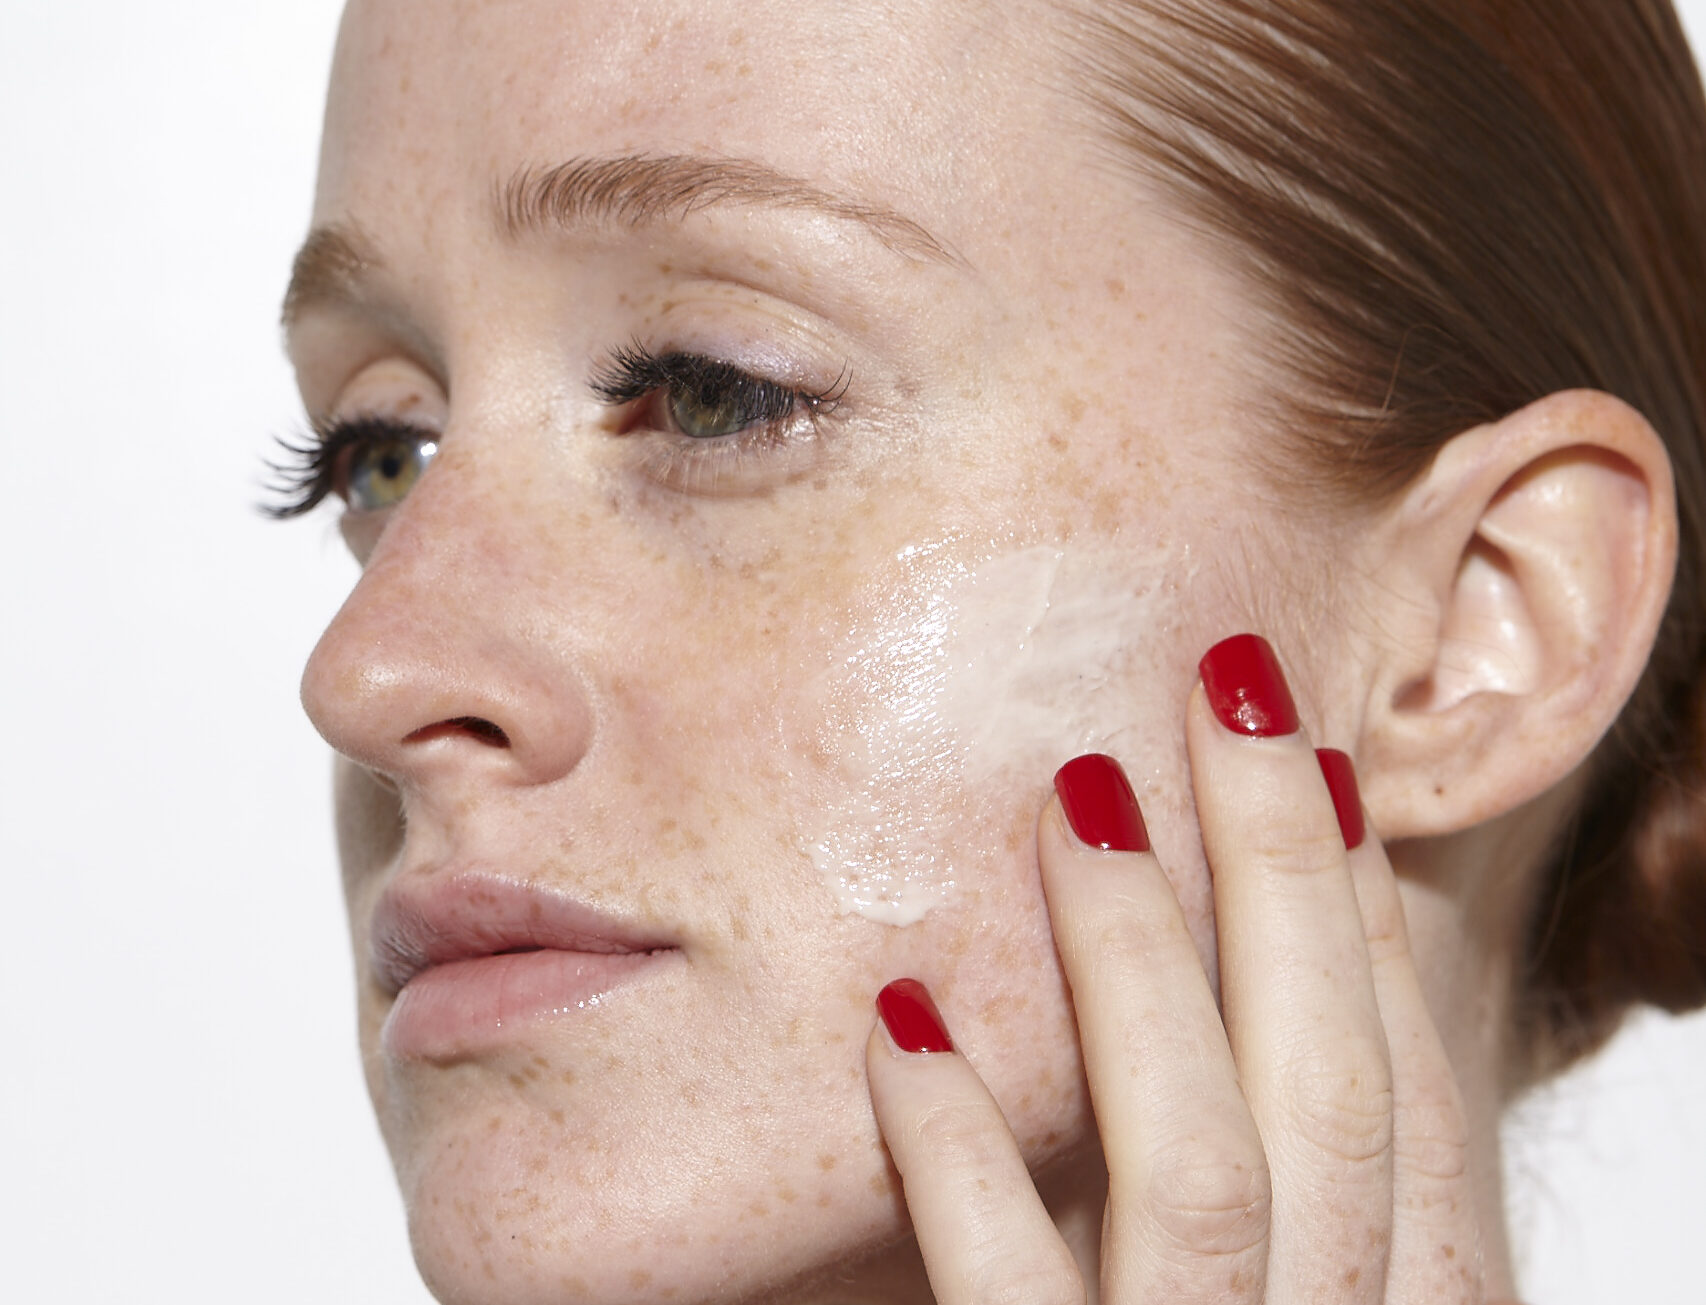 We Tried “Slugging” And This Is How Our Redhead Skin Reacted